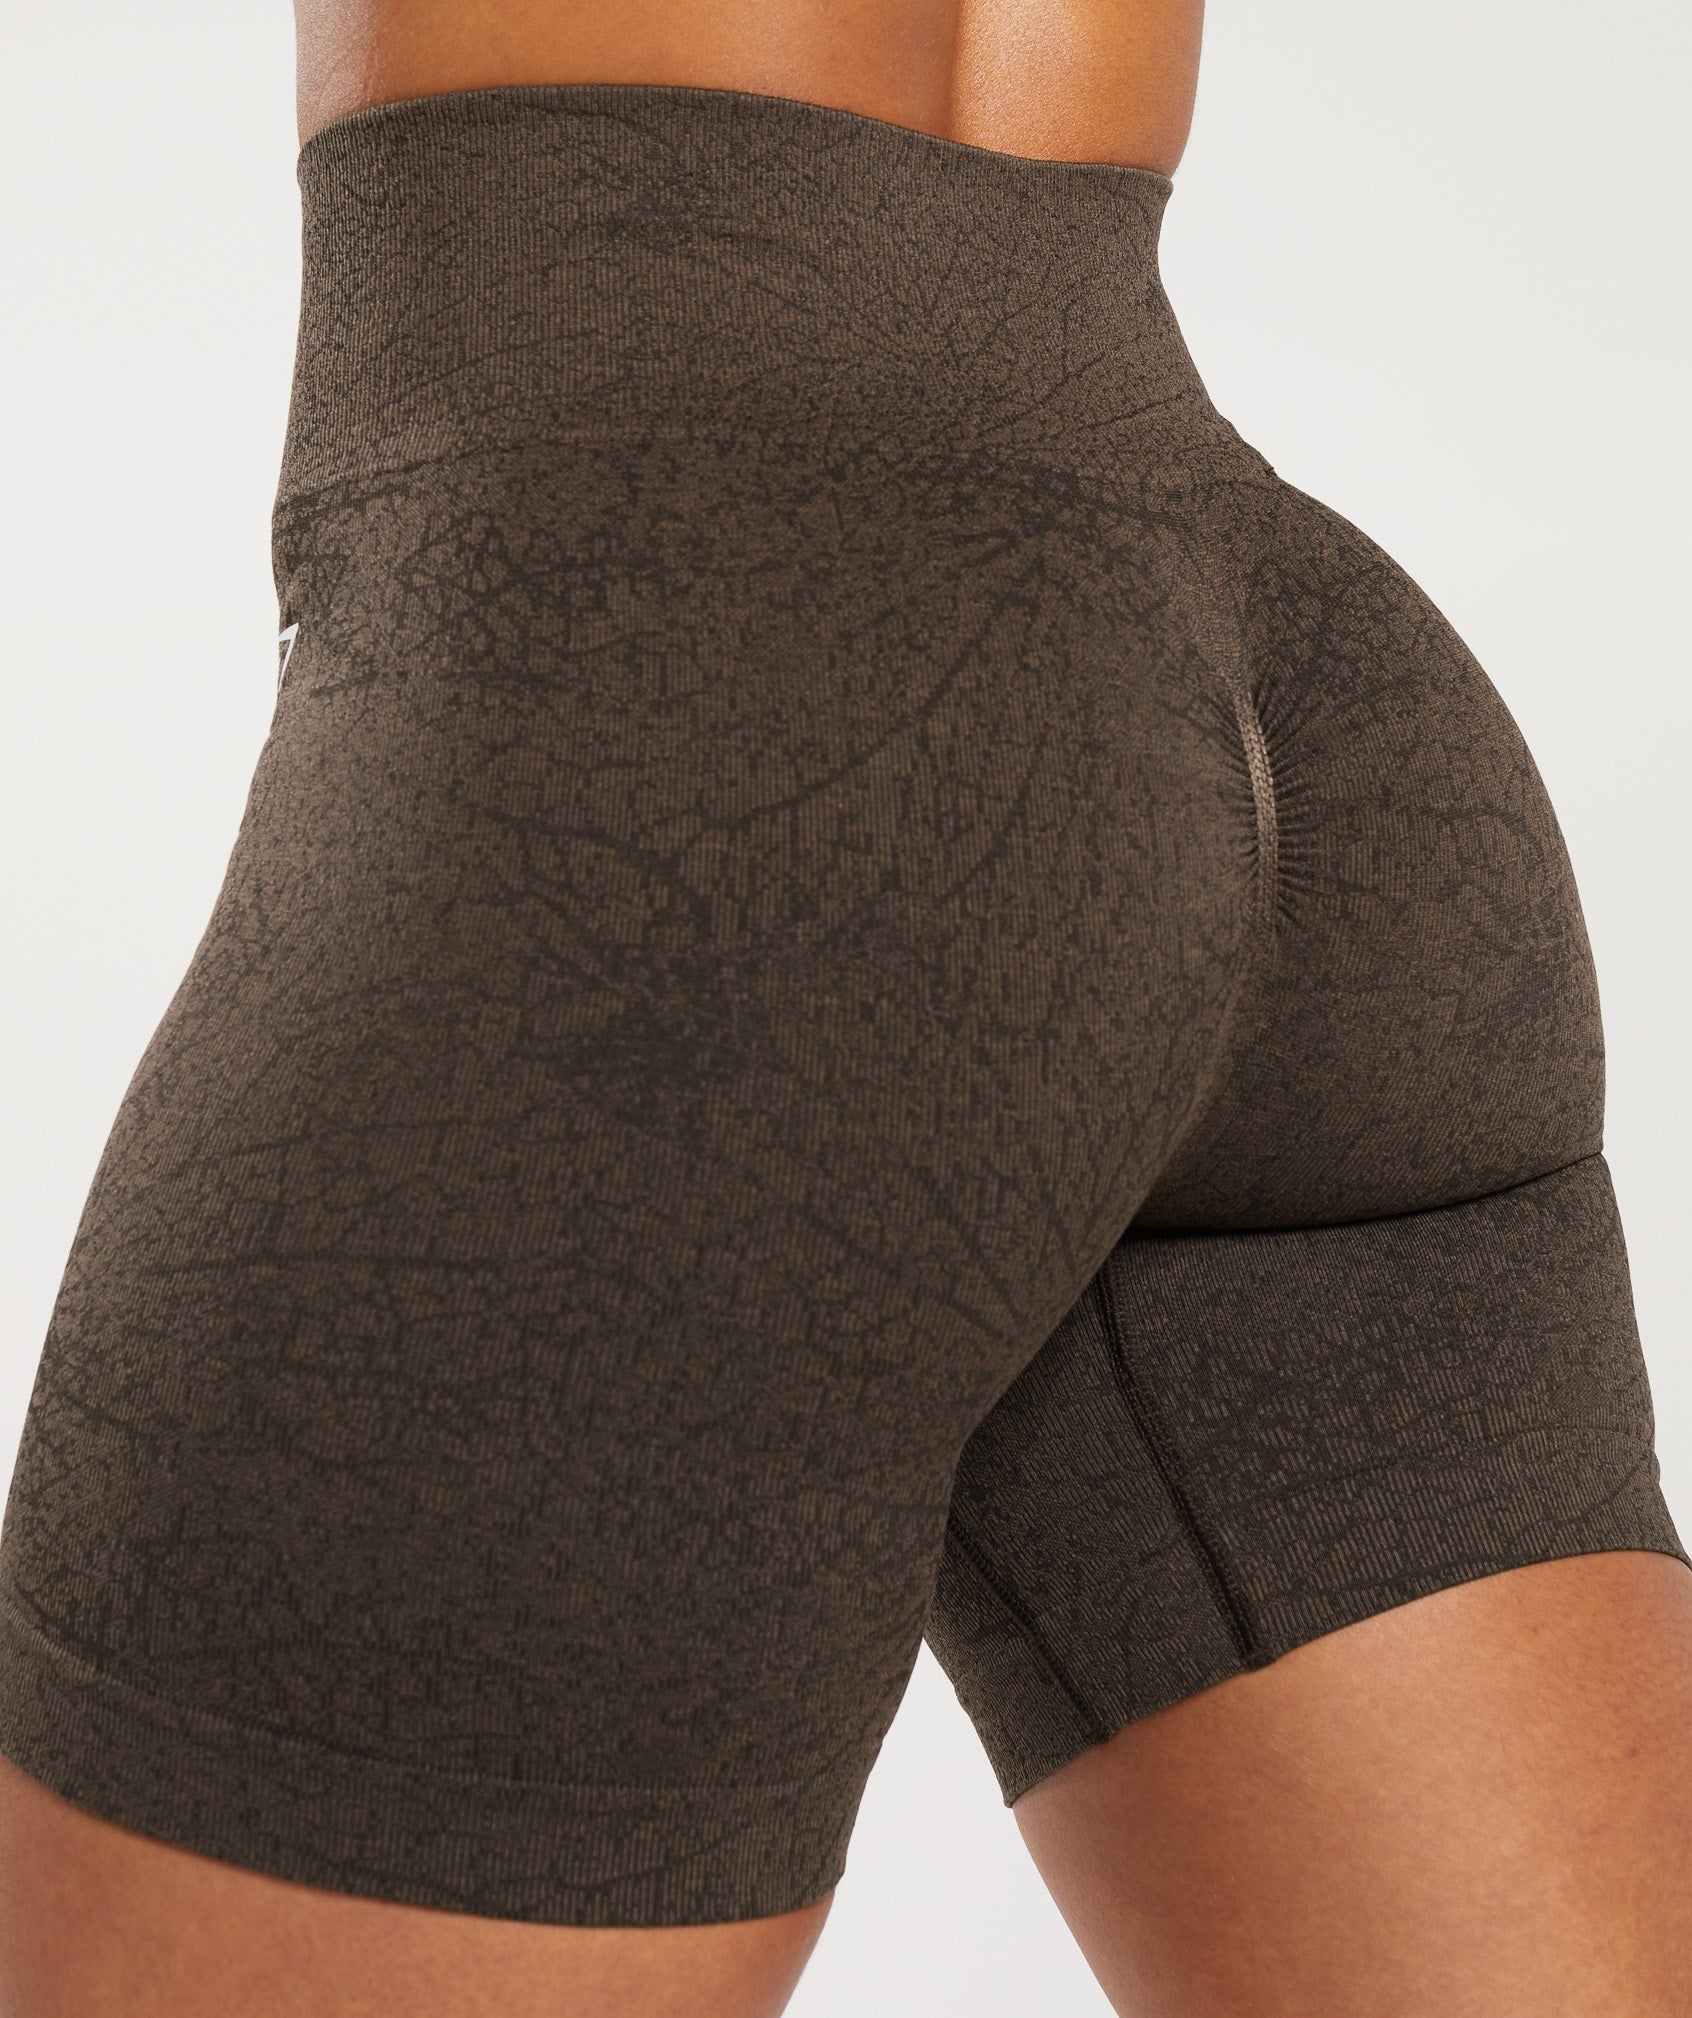 Adapt Pattern Seamless Shorts in Woodland Brown/Soul Brown - view 6